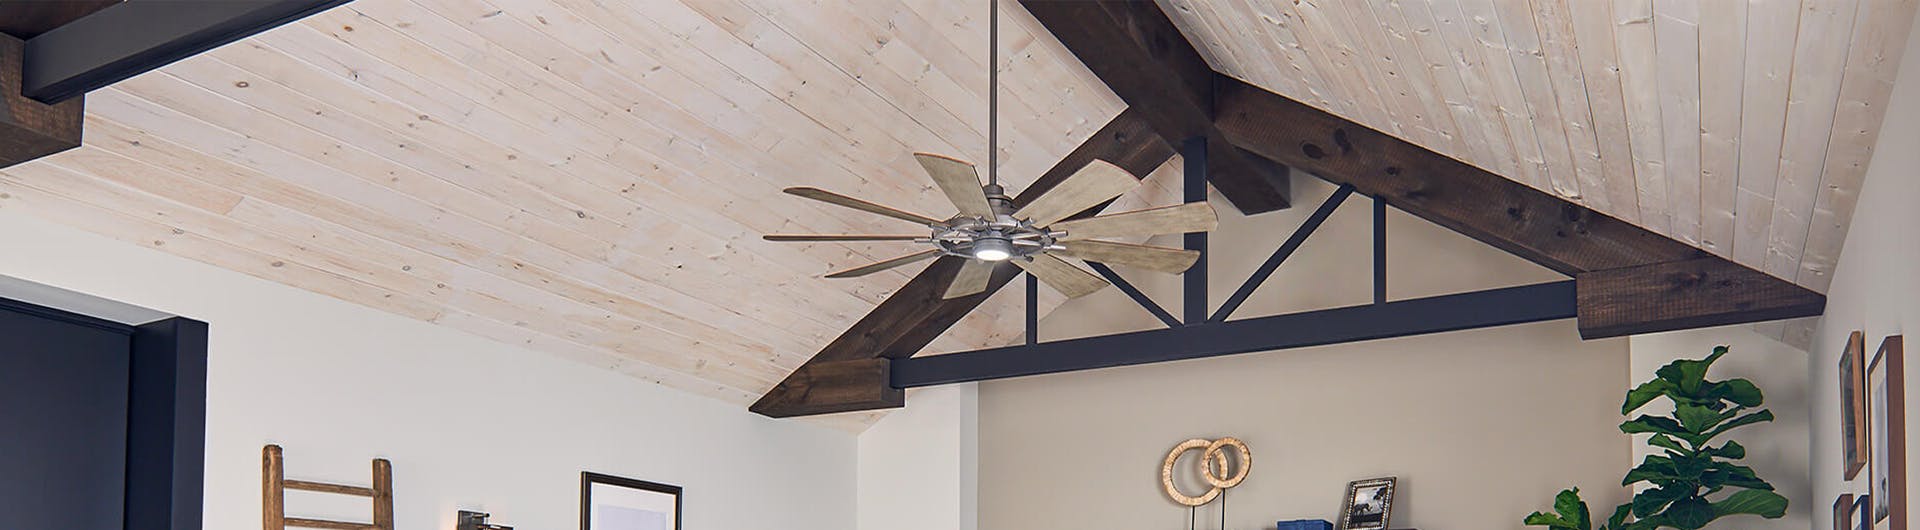 Barn style living room with a Gentry ceiling fan turned on during the day